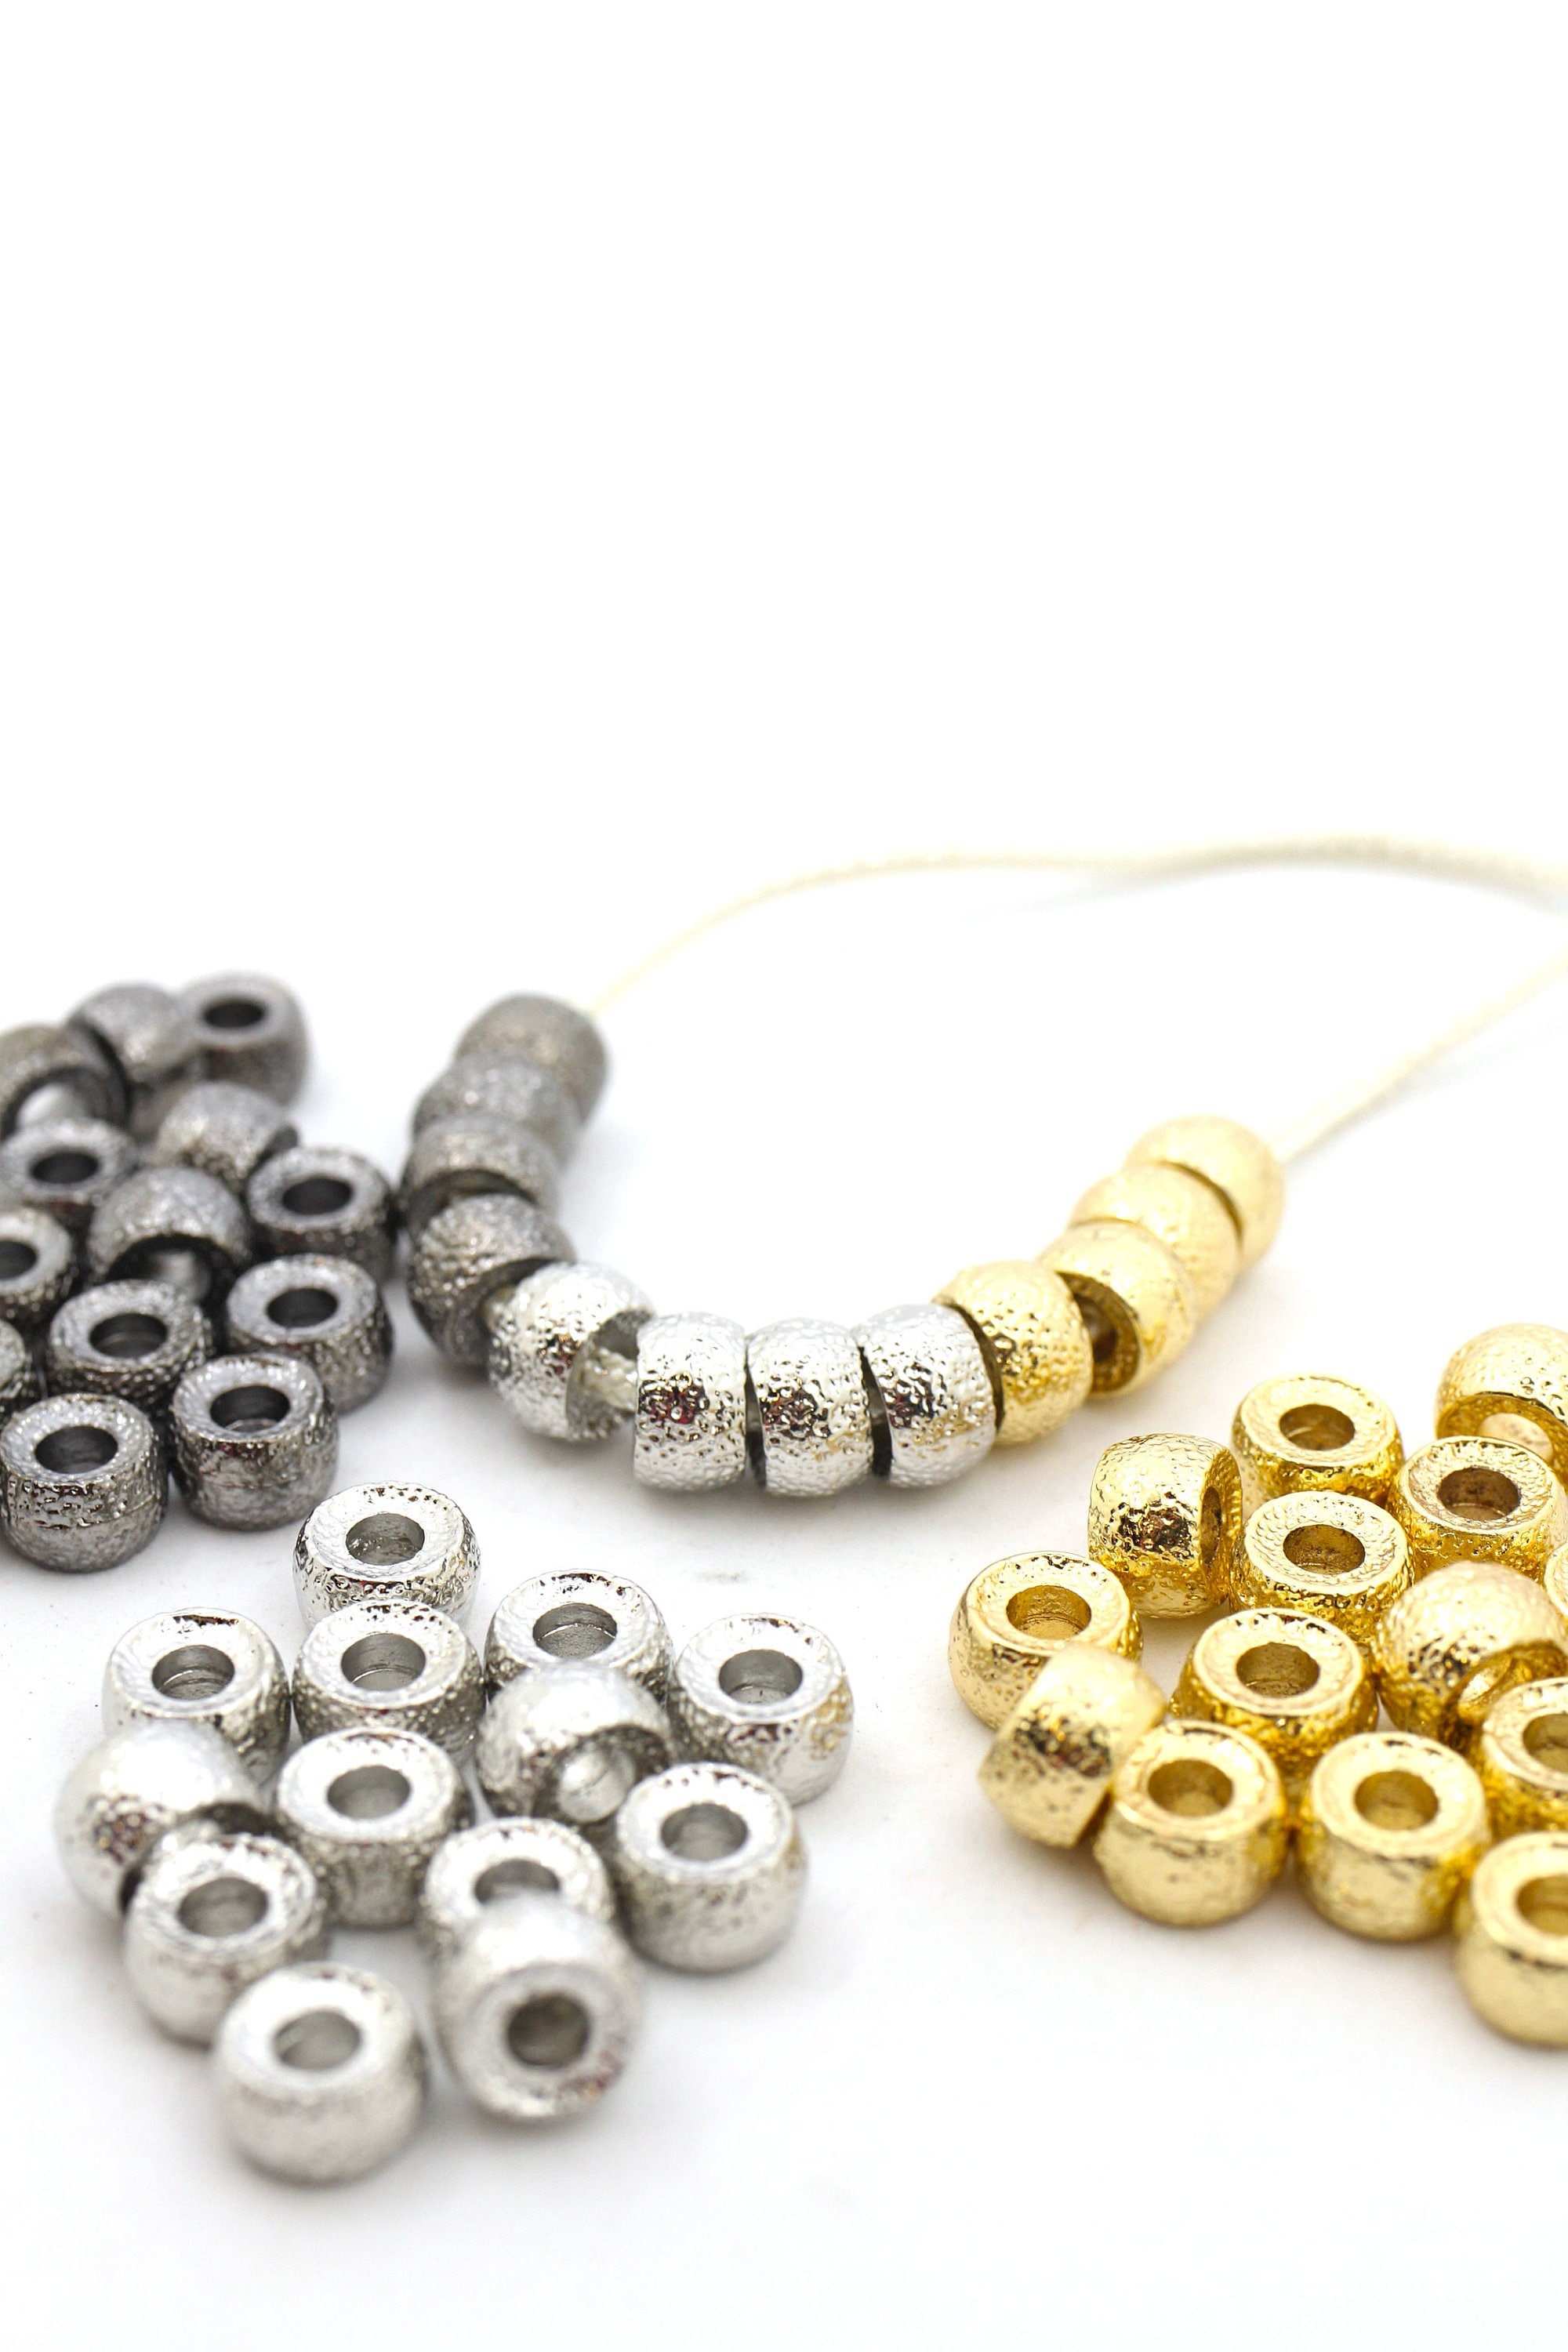 Beads. 9x6 Mm, Metalized Pony Beads. Sold by Lots of 250 Pieces. 